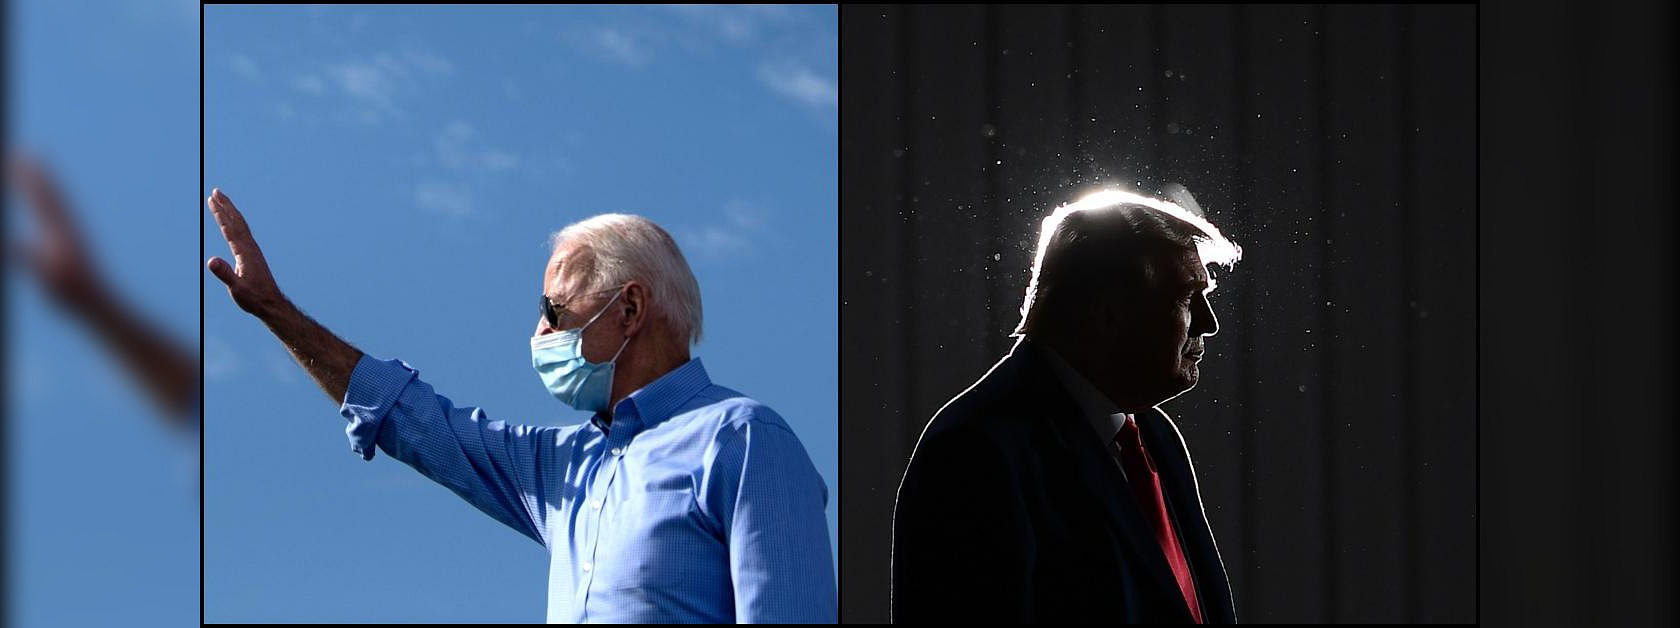 Trump has also so far not conceded the election to Biden, vowing to launch unspecified legal challenges to the outcome. His refusal to concede, however, does not have any practical impact on Biden's victory. Credit: AFP